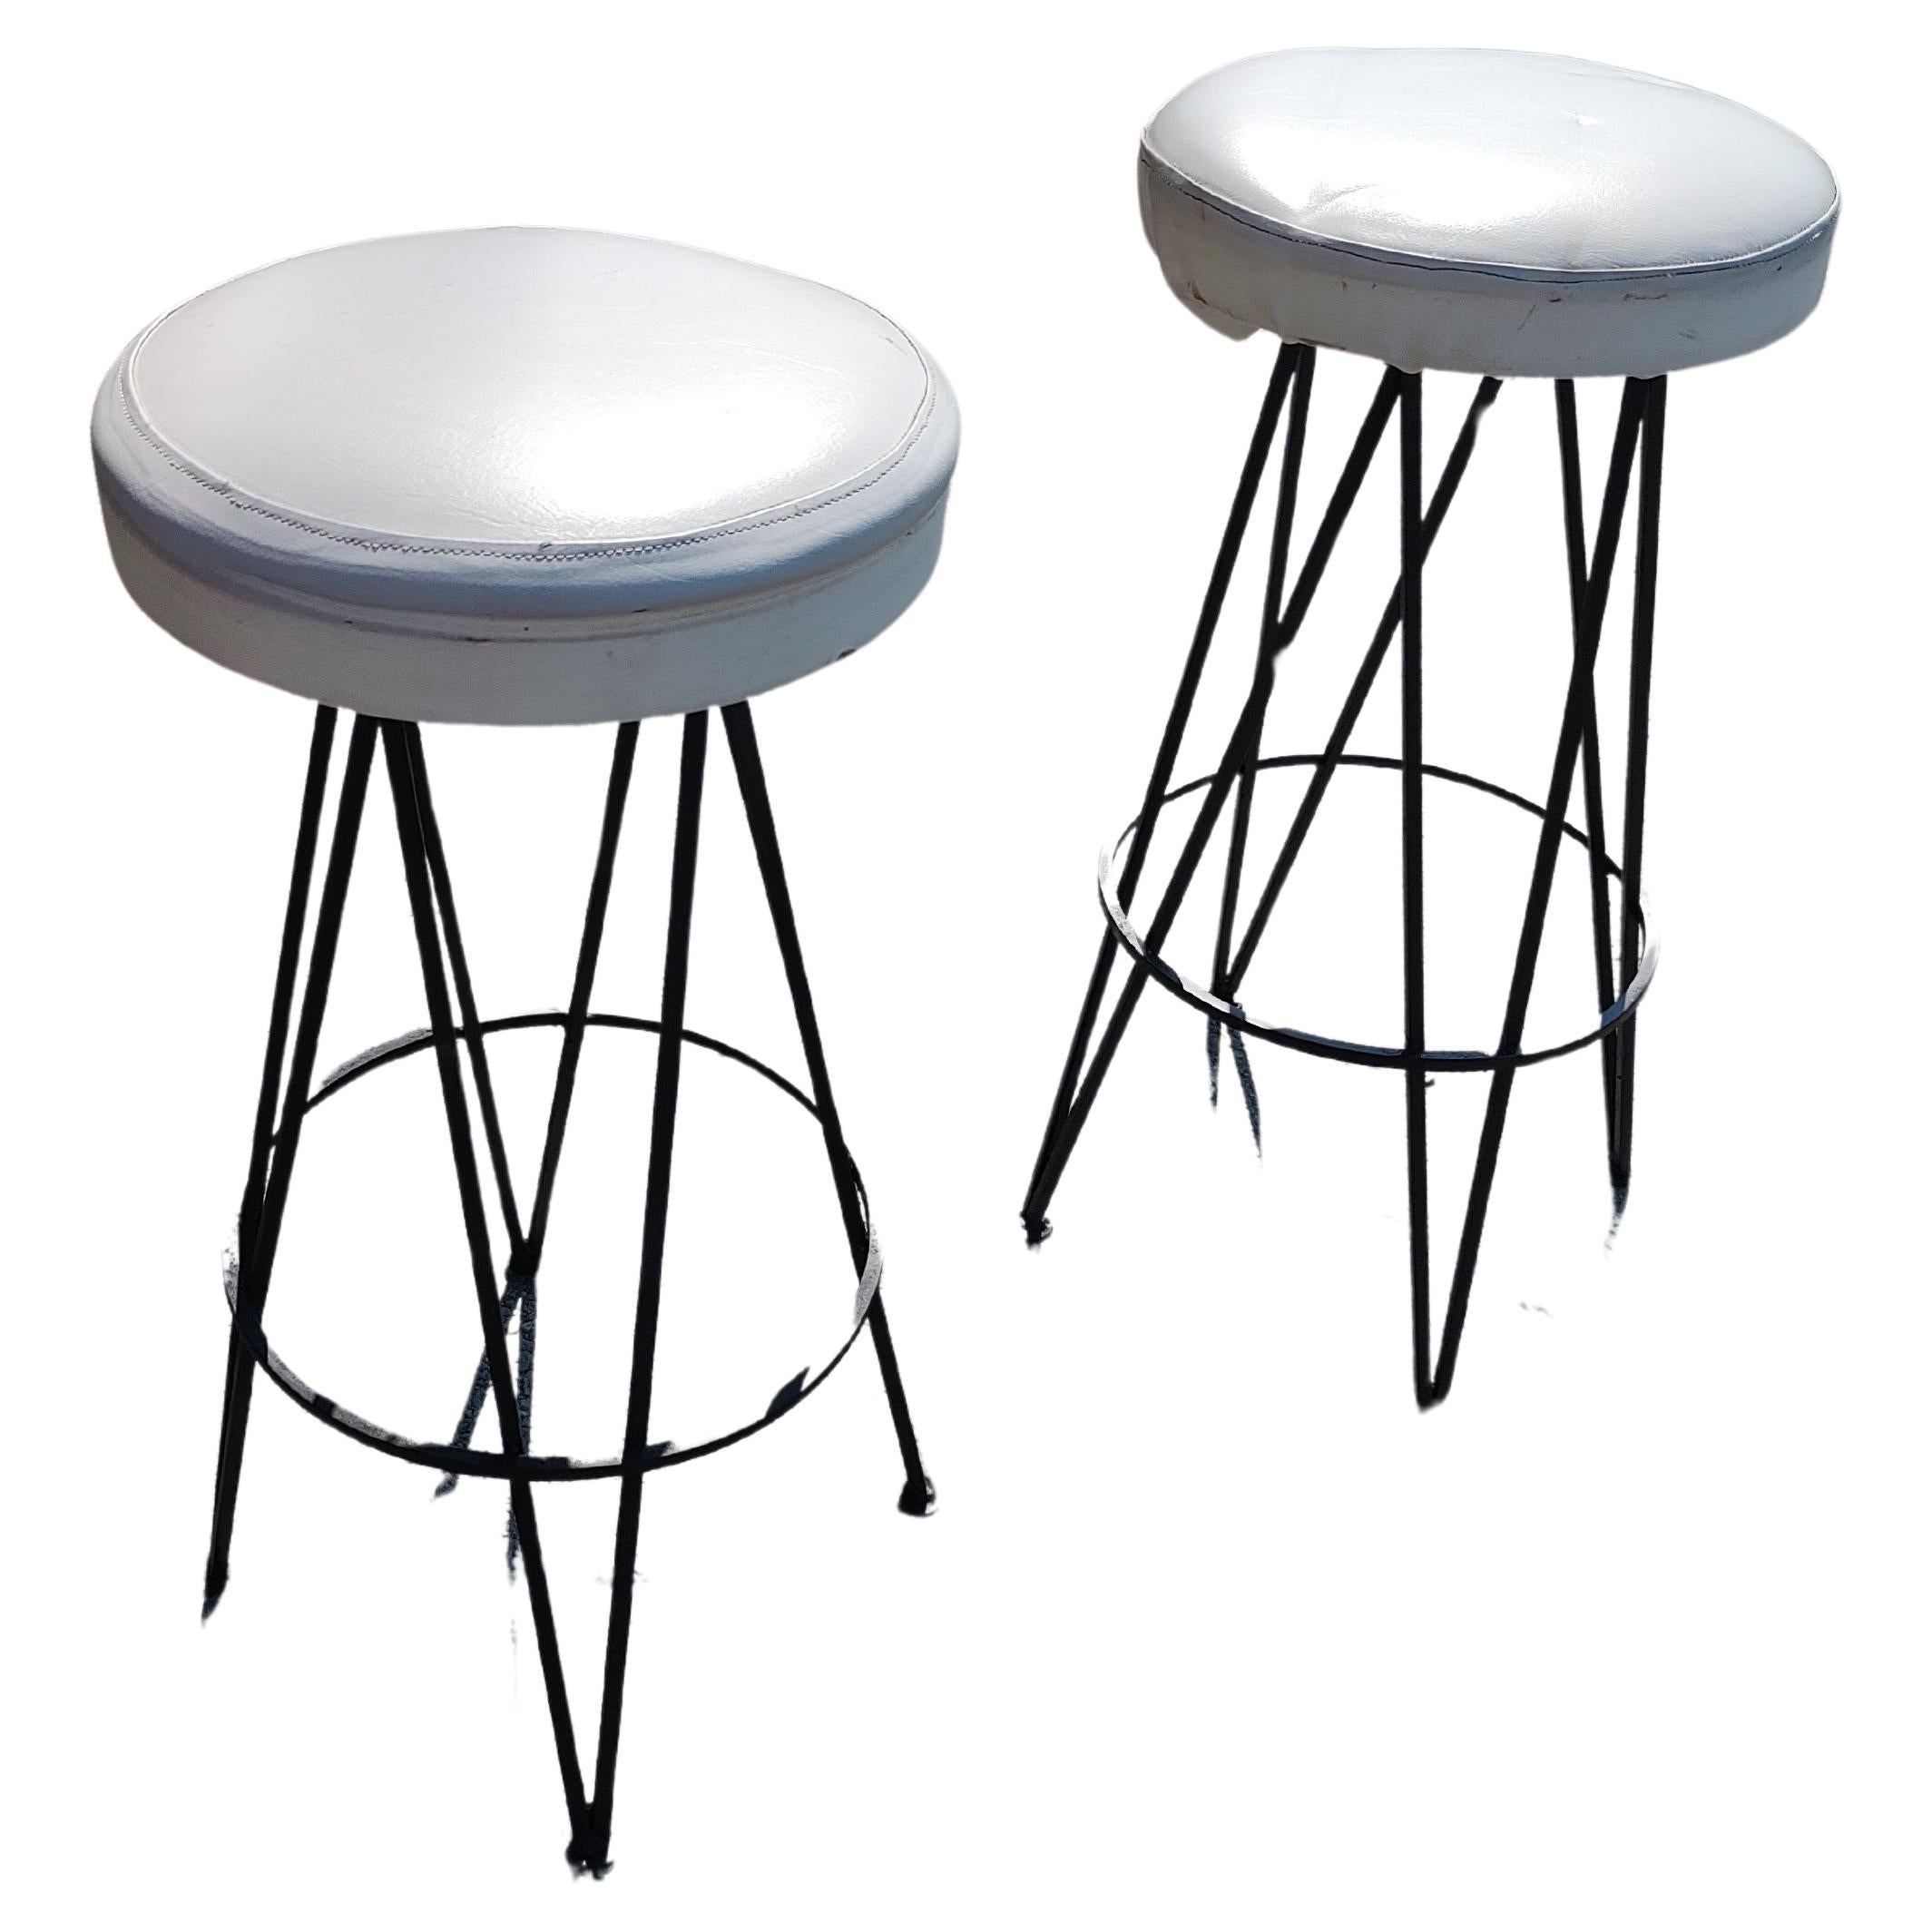 Mid-Century Modern Sculptural Iron Bar Stools 4 Available For Sale